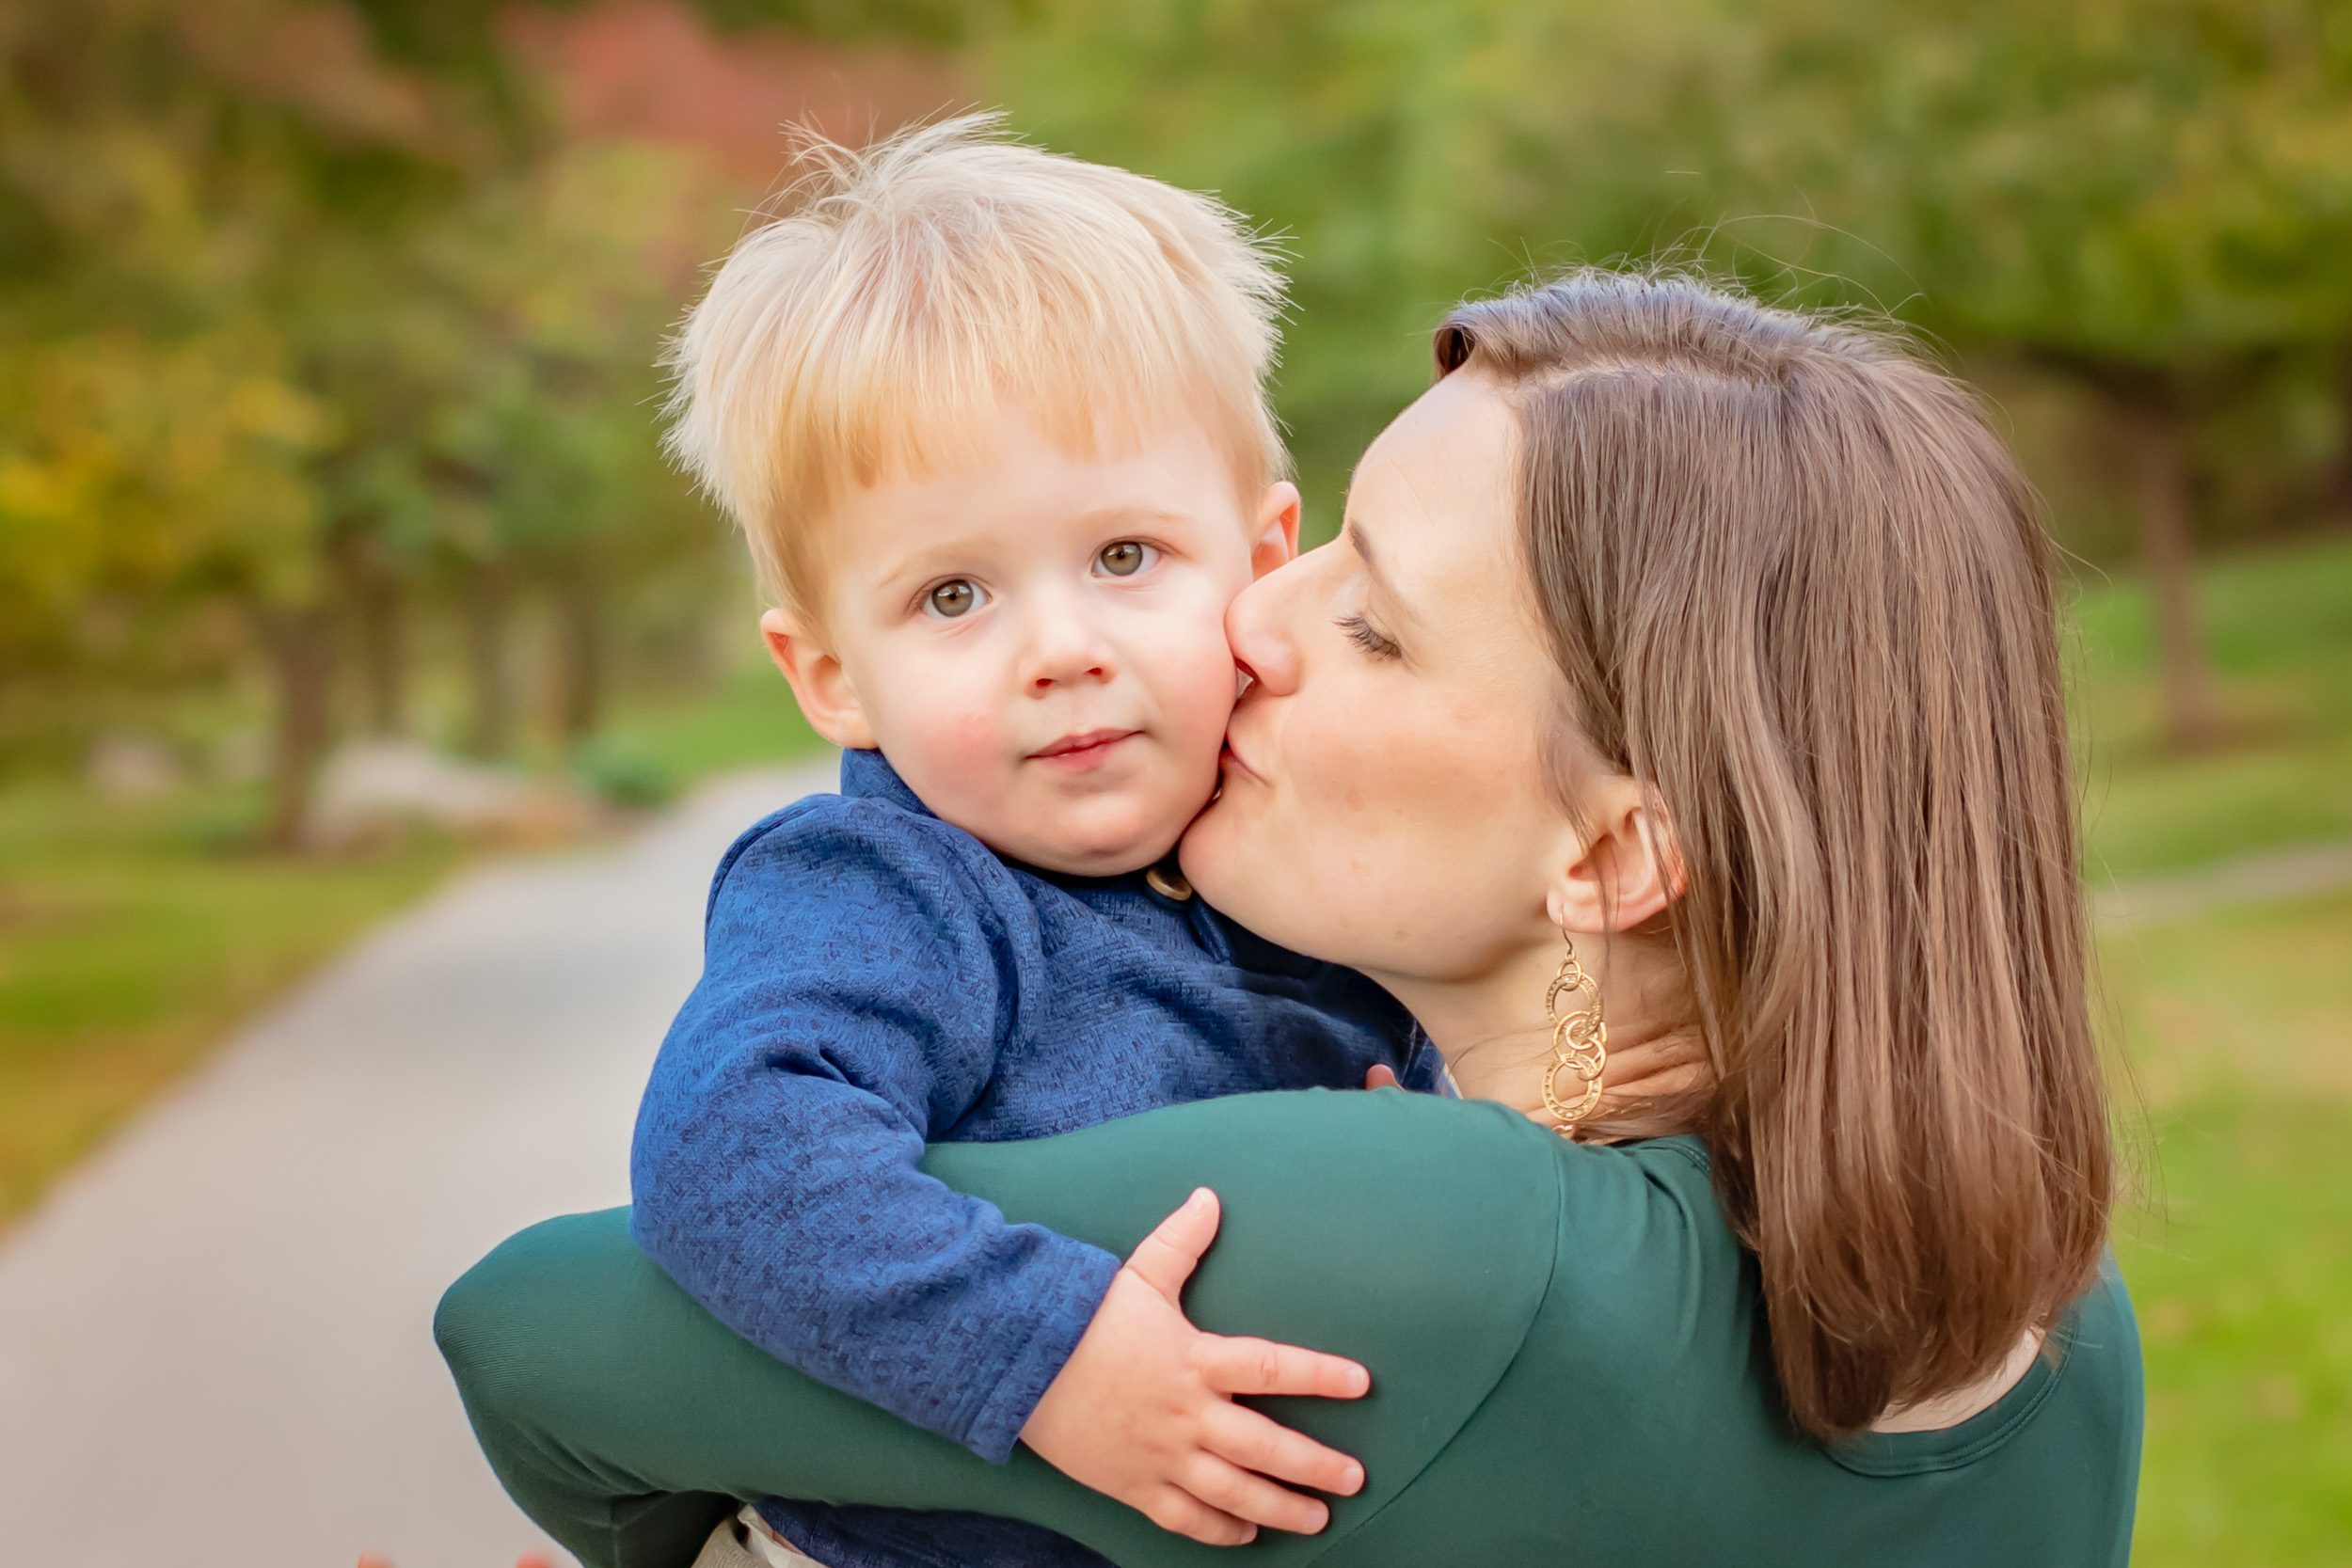 A young boy looking over his mom's shoulder as she kisses him on the cheek during a family photoshoot